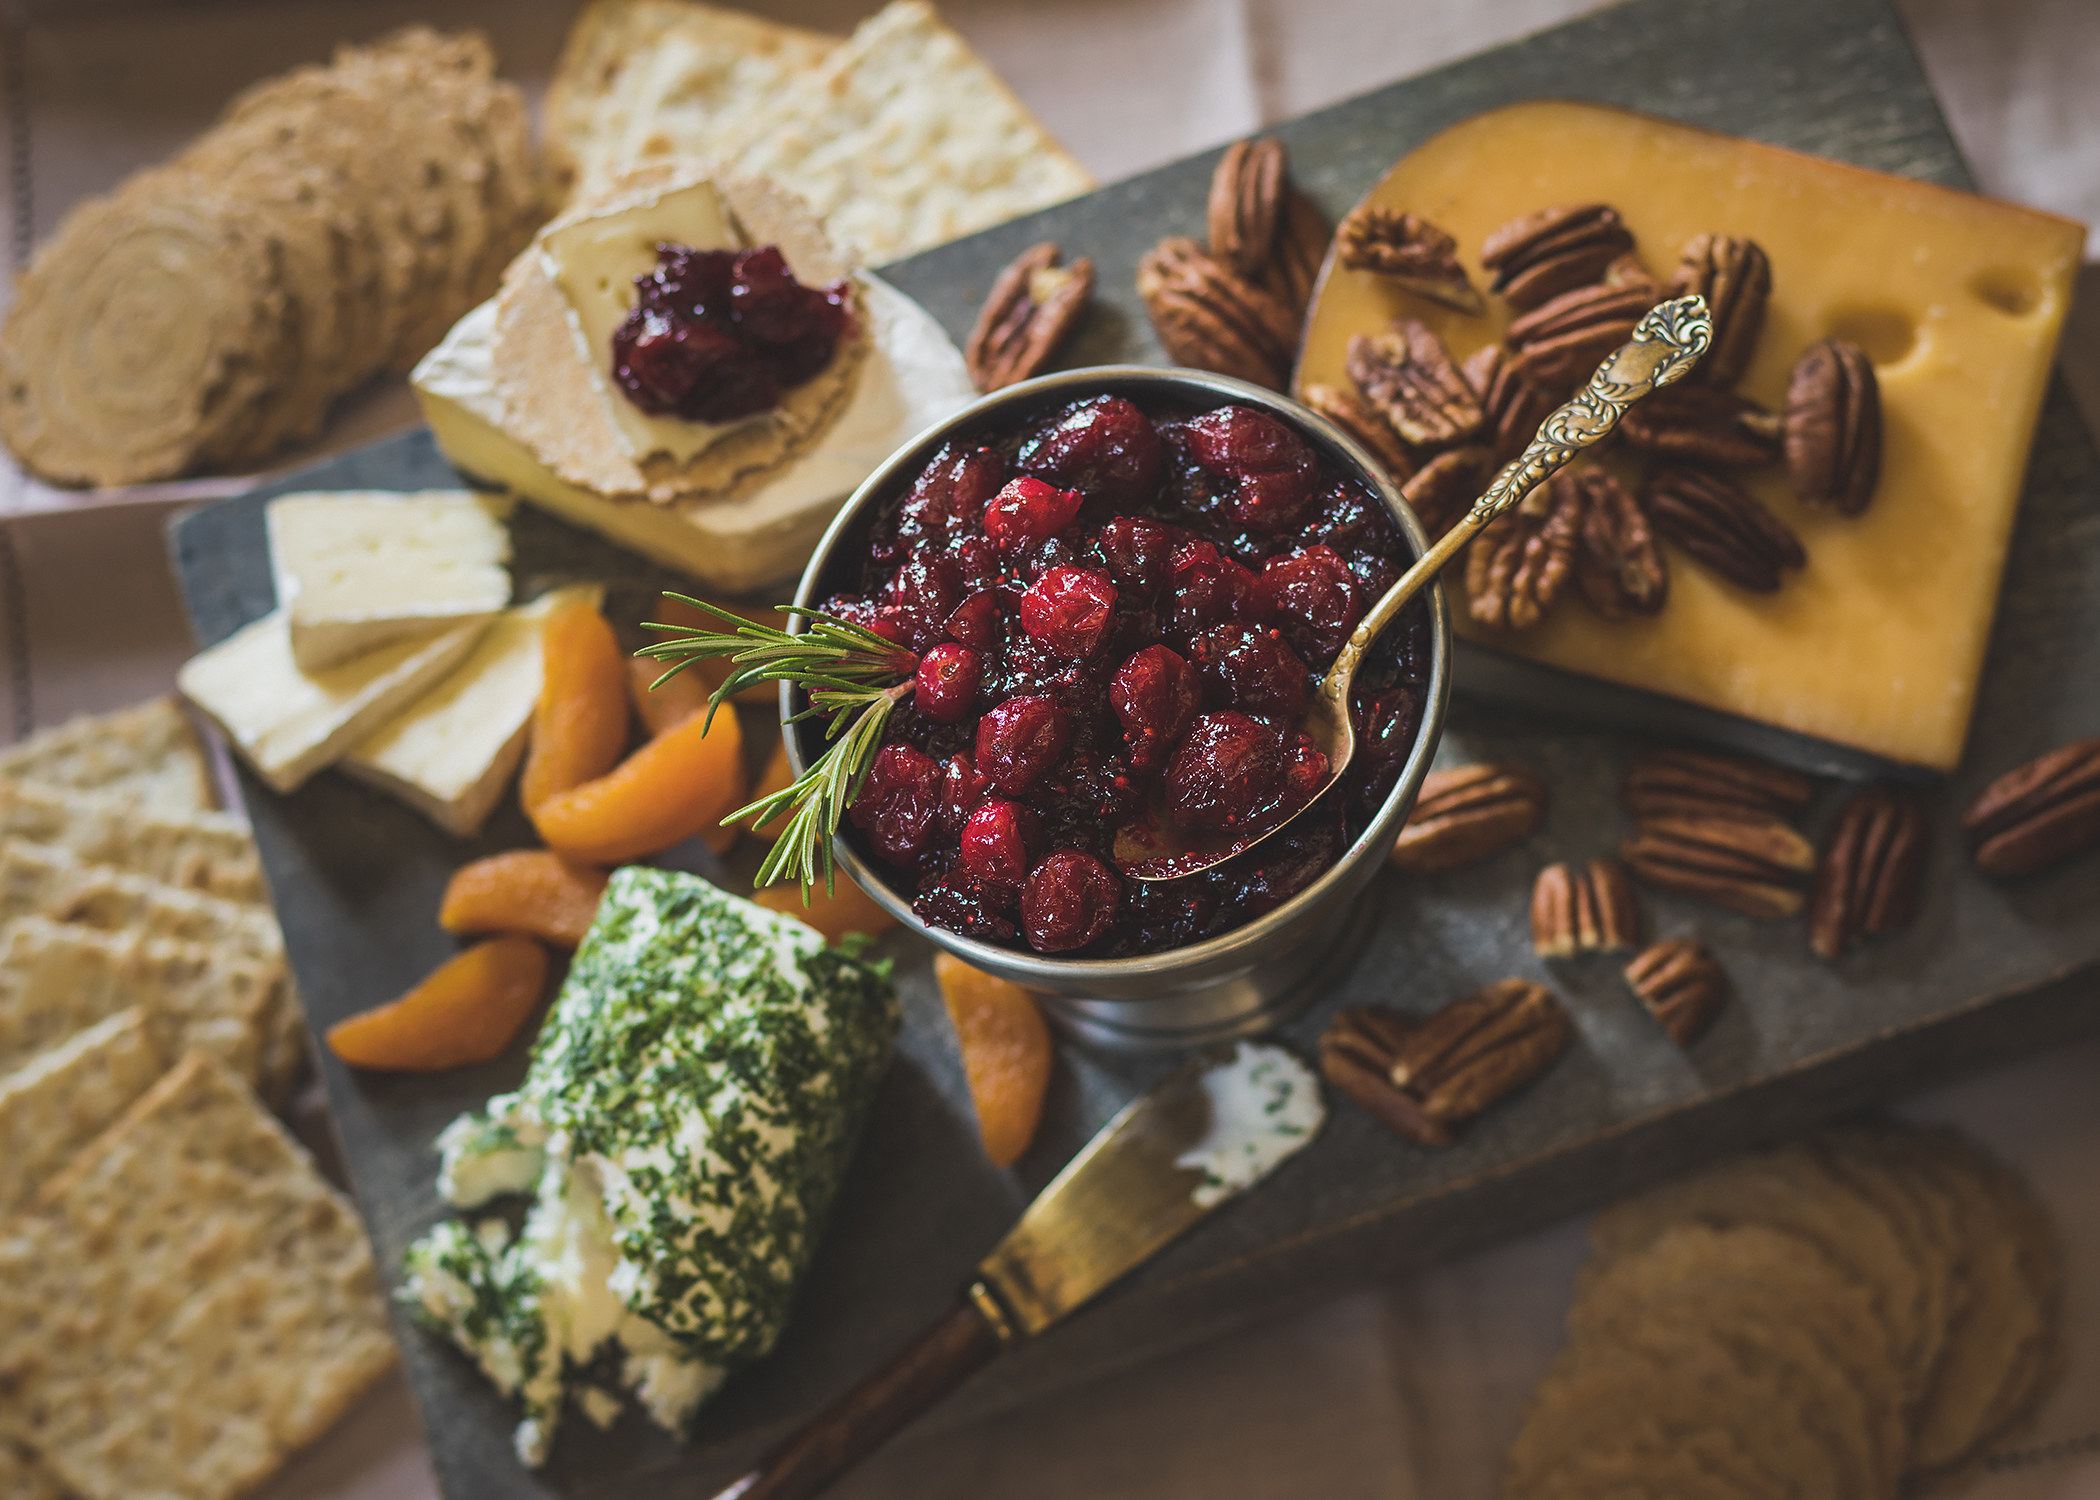 cheeseboard with small bowl of homemade cranberry sauce in the center